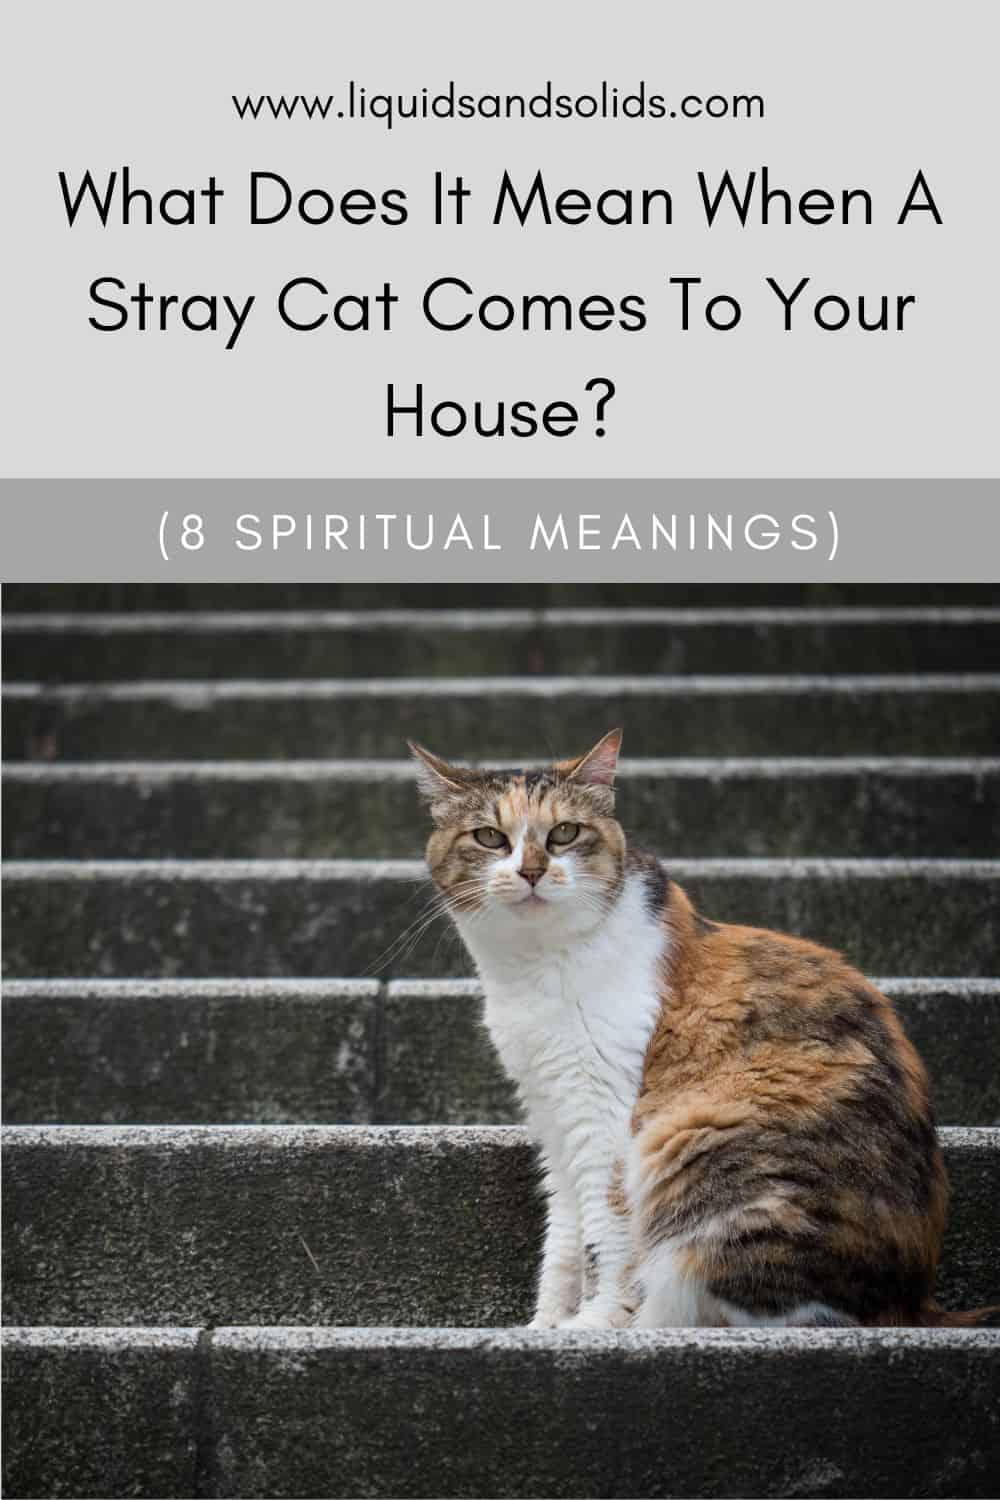 What Does It Mean When A Stray Cat Comes To Your House? (8 Spiritual Meanings)